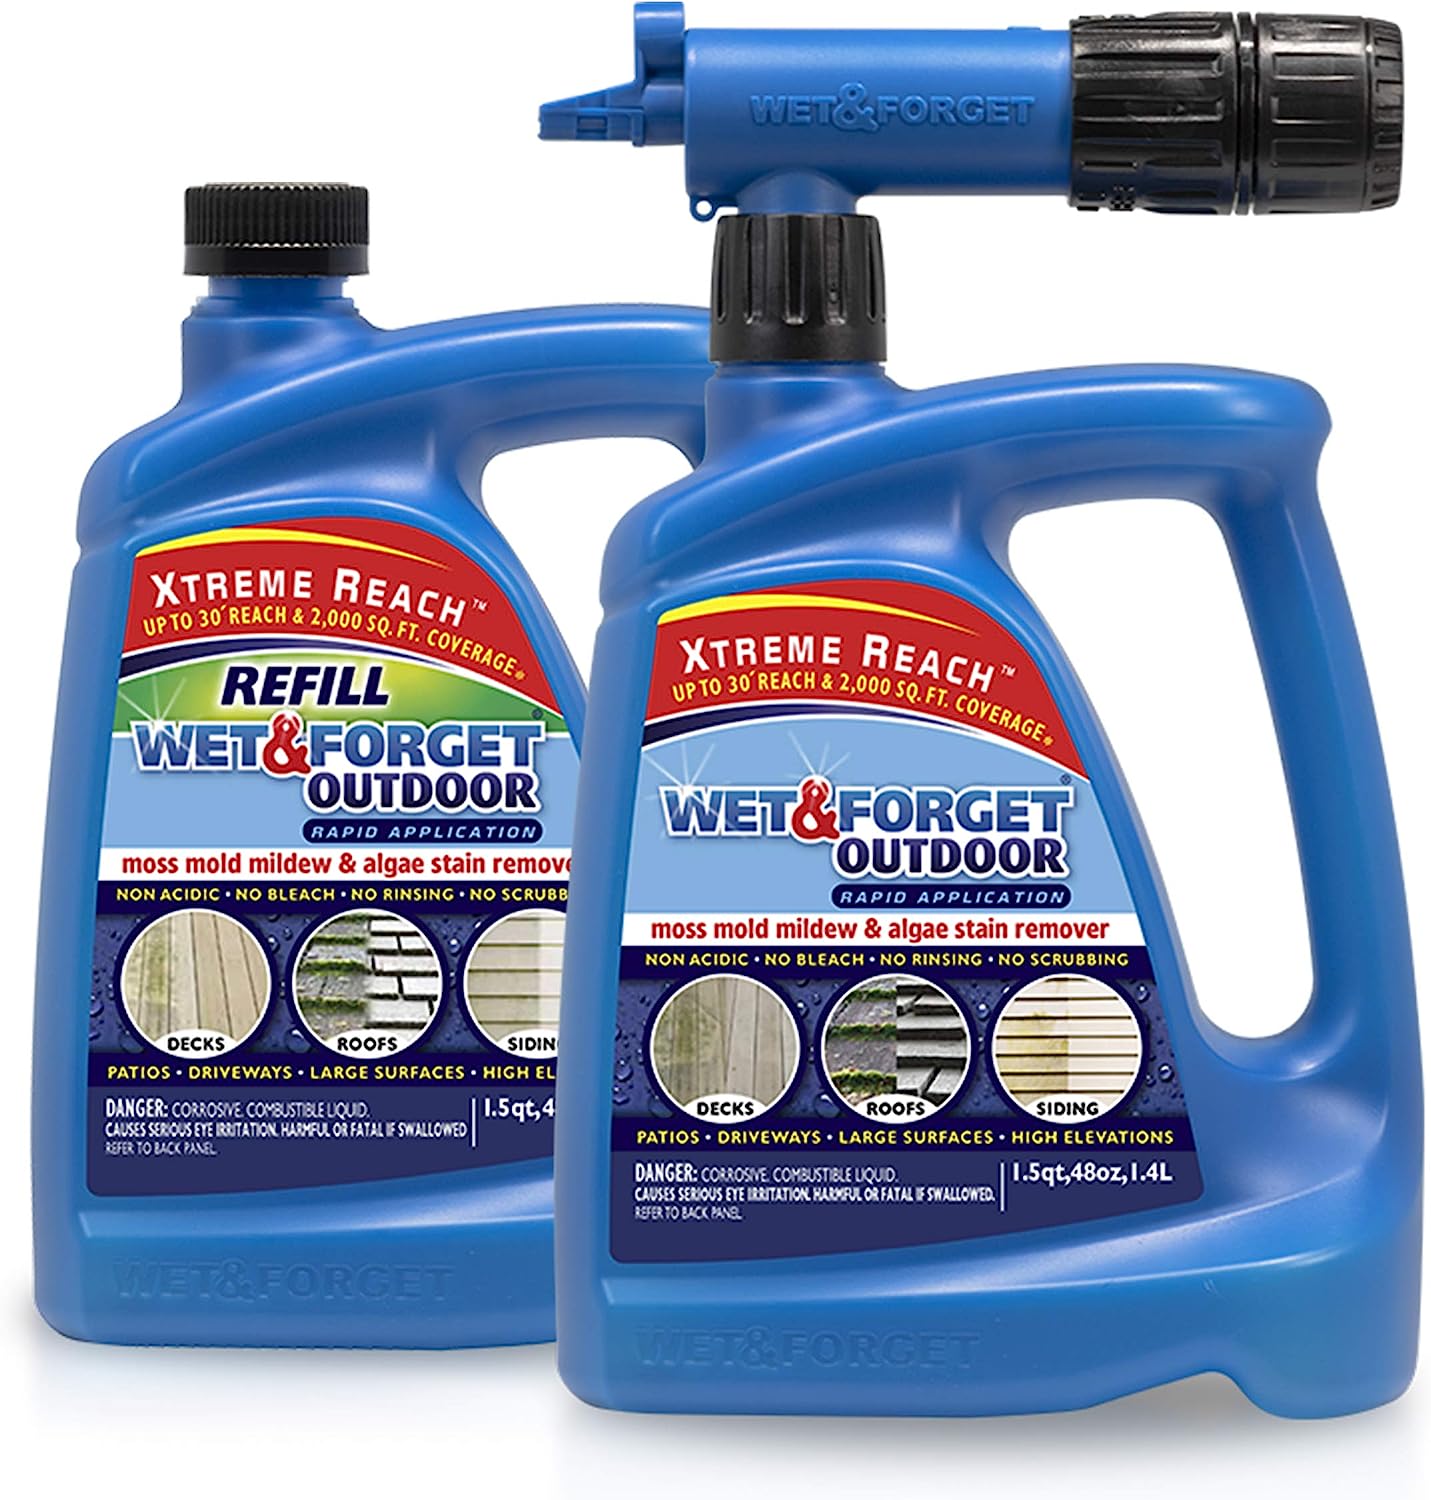 Wet & Forget Outdoor Moss, Mold, Mildew, & Algae Stain [...]